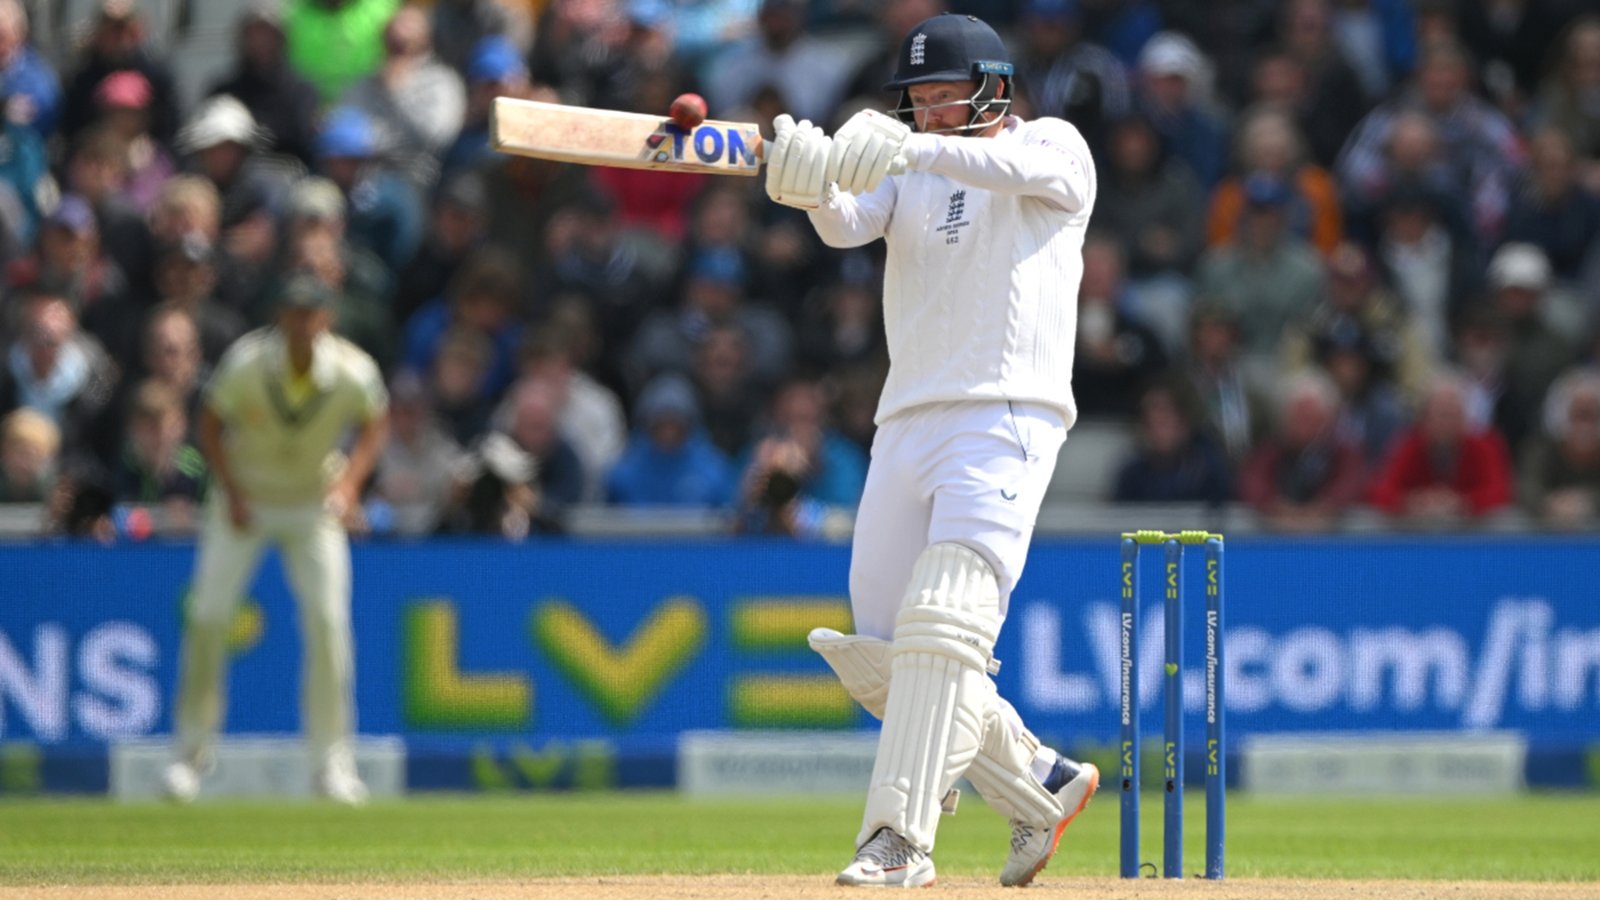 Jonny Bairstow's 99 after Controversial Stumping